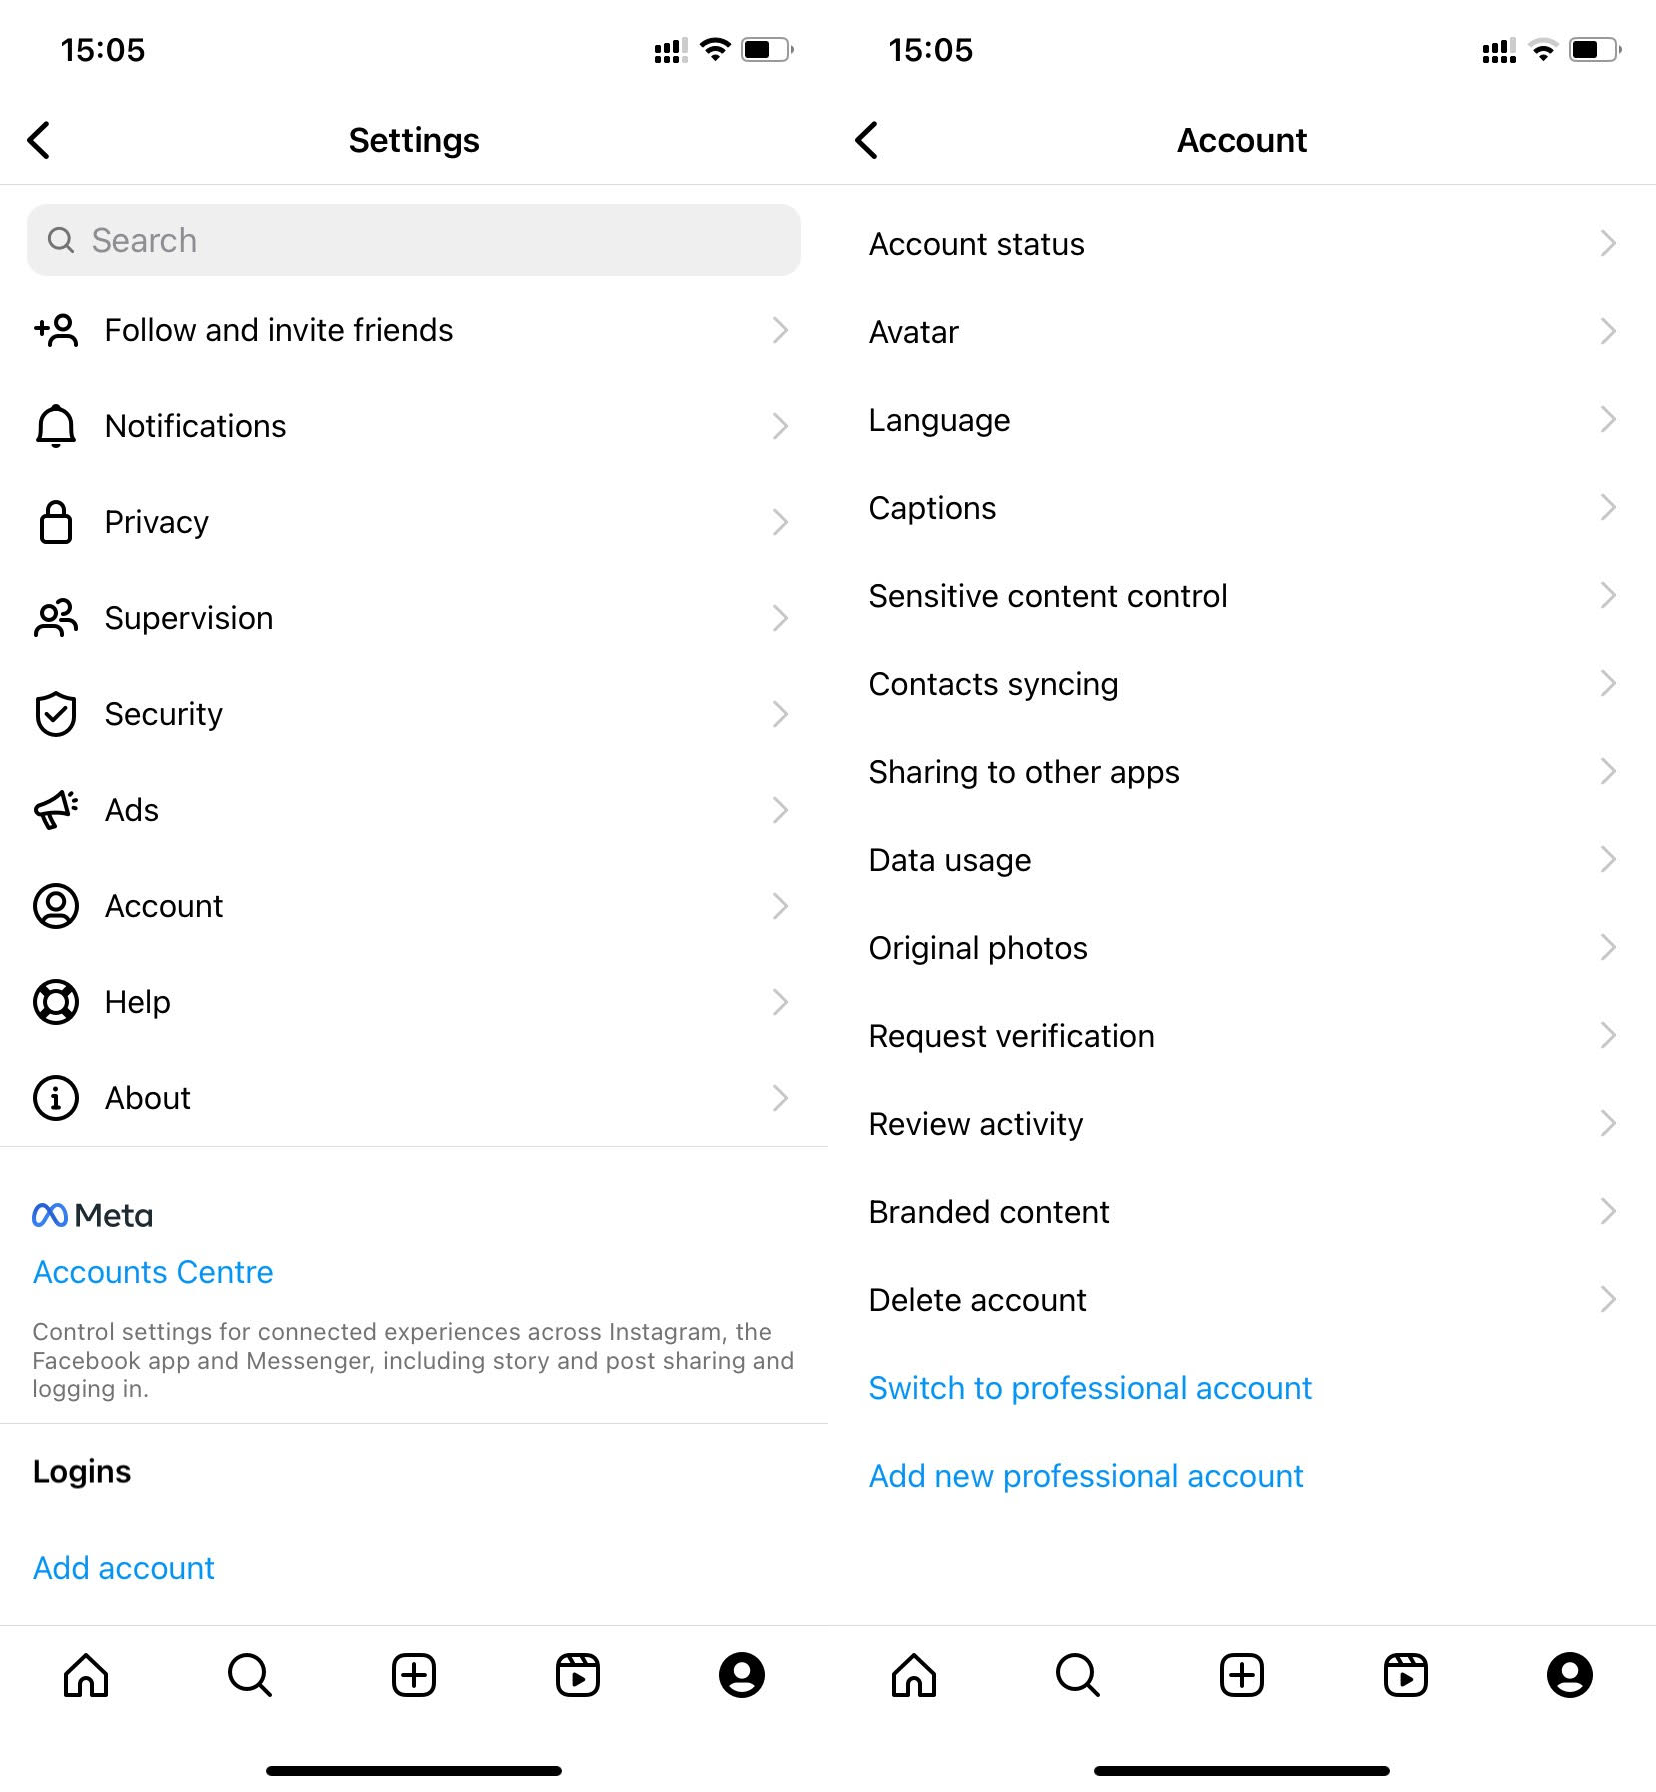 A screenshot of the “Settings” and “Account” sections on Instagram